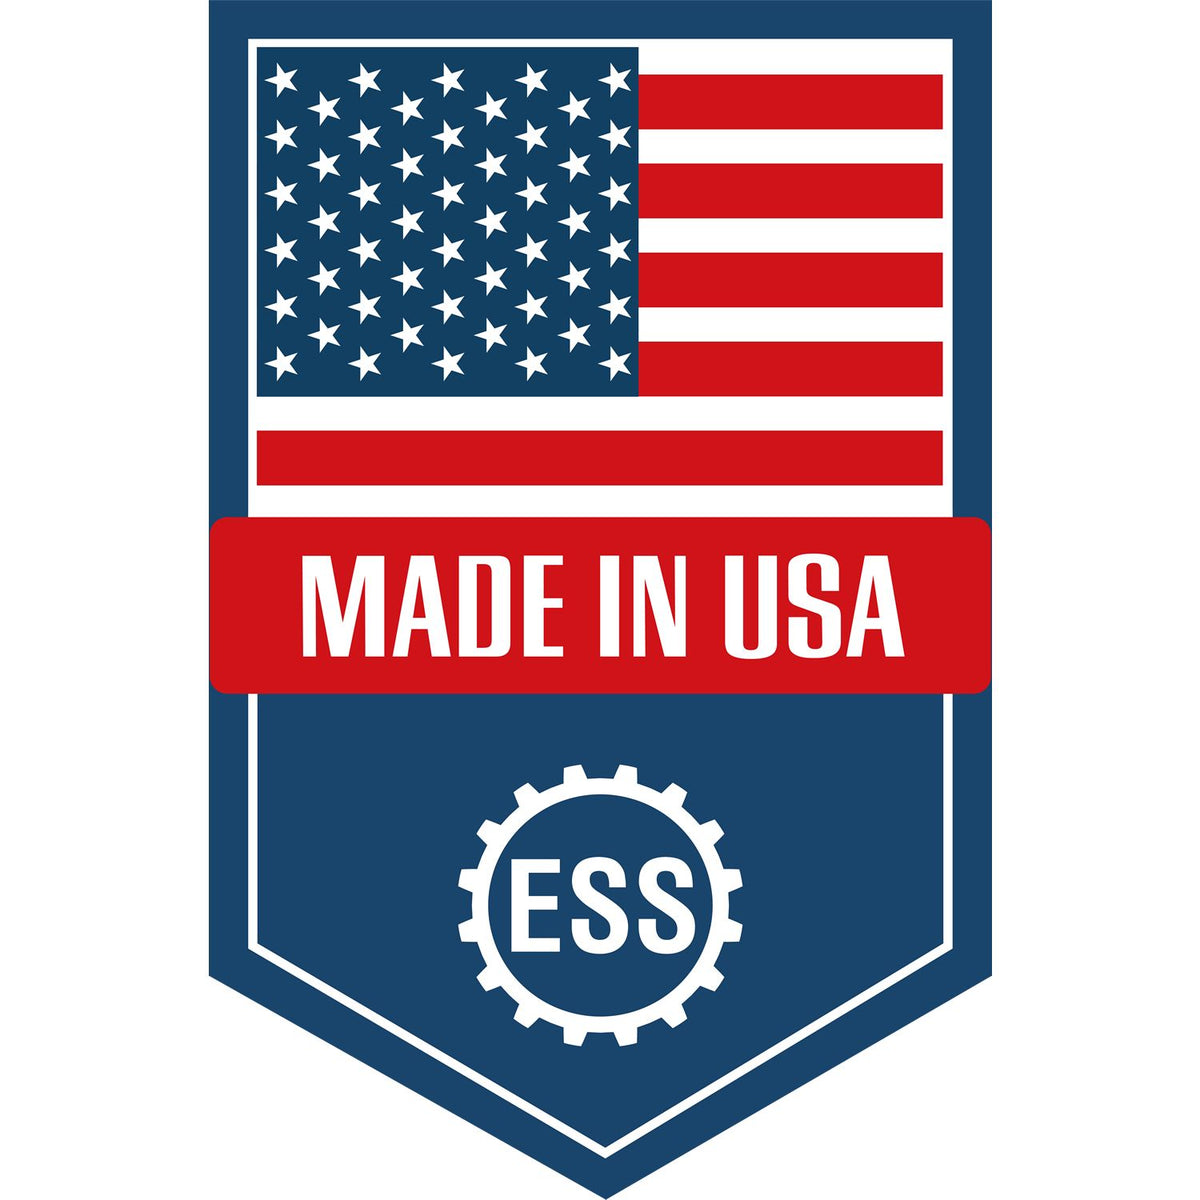 An icon or graphic with an american flag and text reading Made in USA for the Slim Pre-Inked Minnesota Landscape Architect Seal Stamp